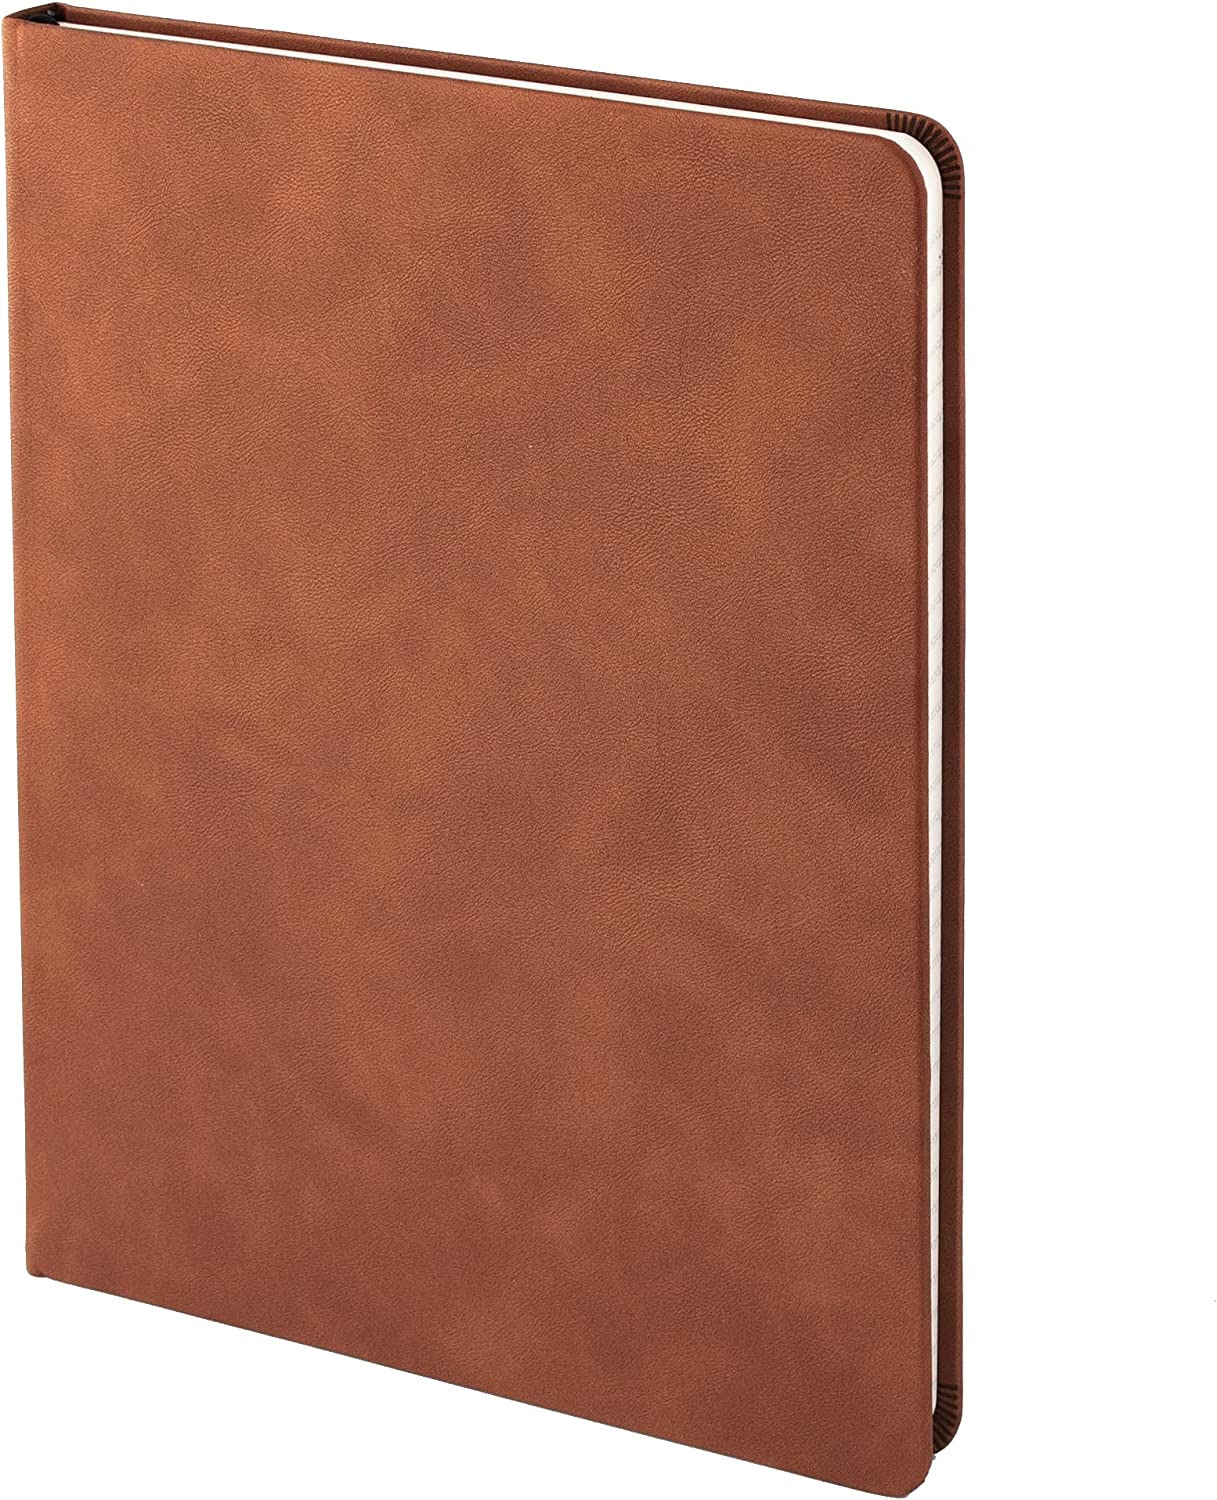 Lined Journal Notebook, Brown Vegan Leather Hard Cover Journal